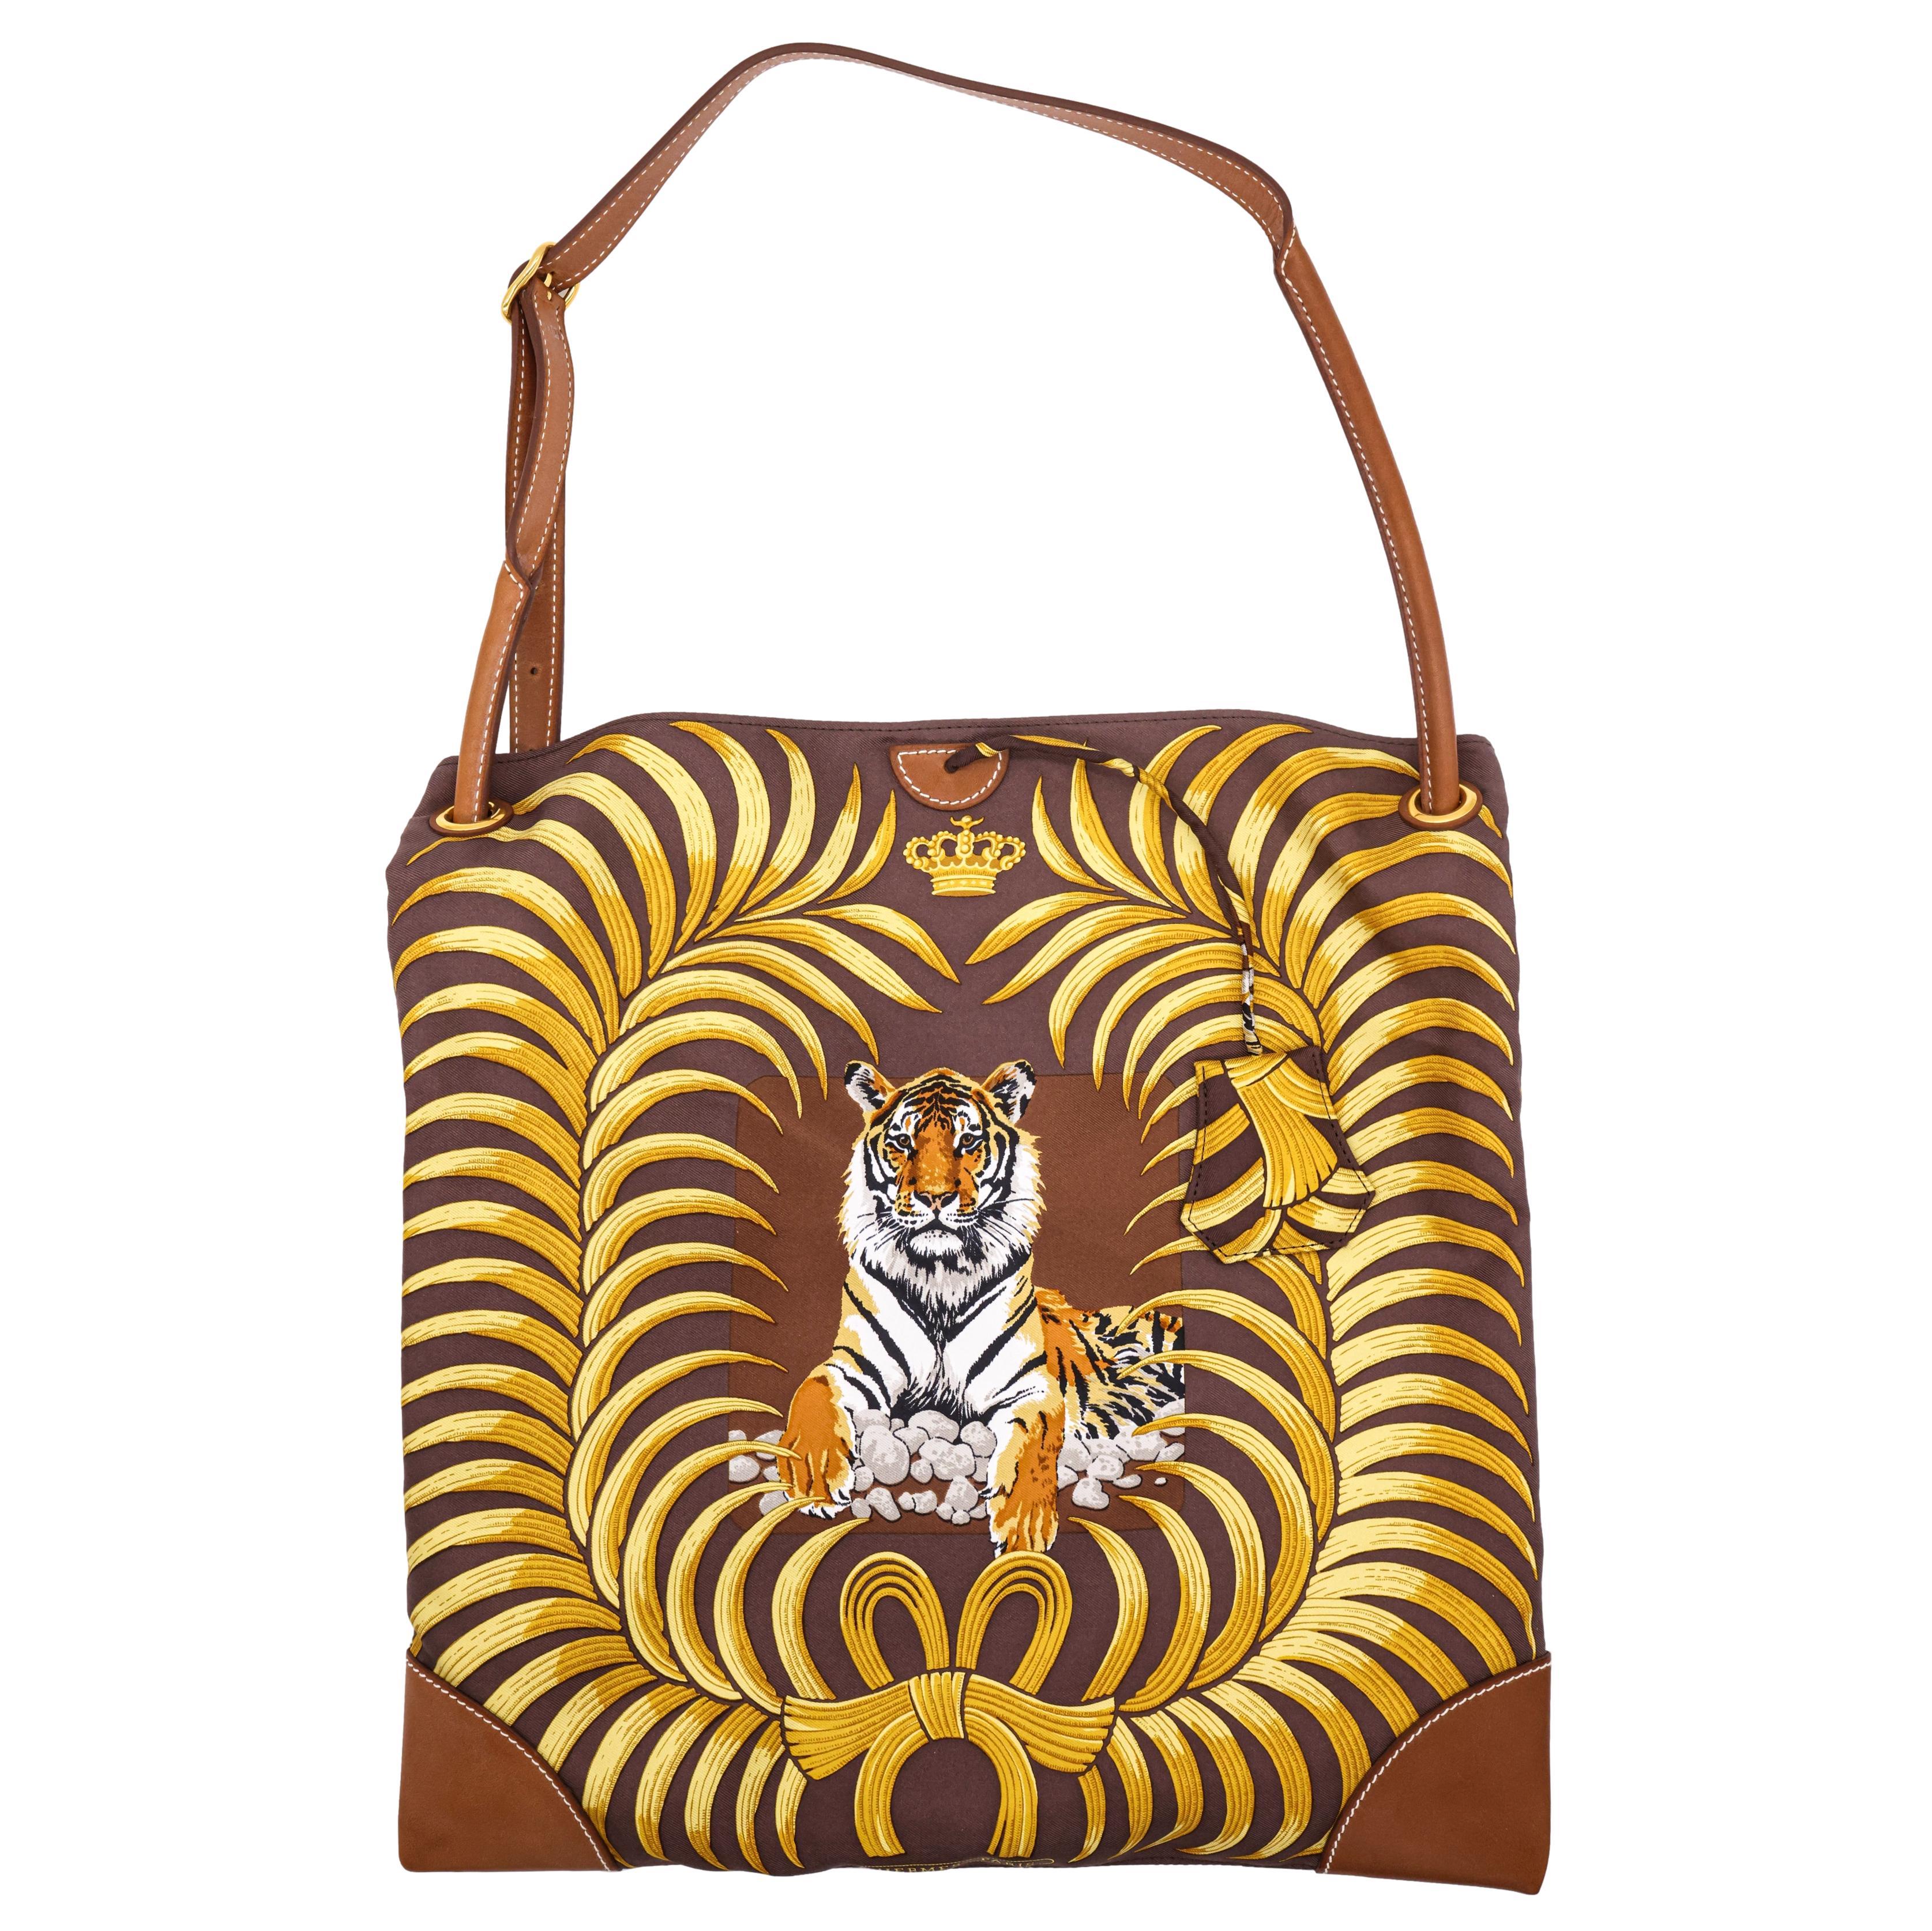 Hermès Limited Edition Silky City Tiger Royal Barenia Leather Shoulder Bag, 2008. This extremely rare and highly sought after limited edition 